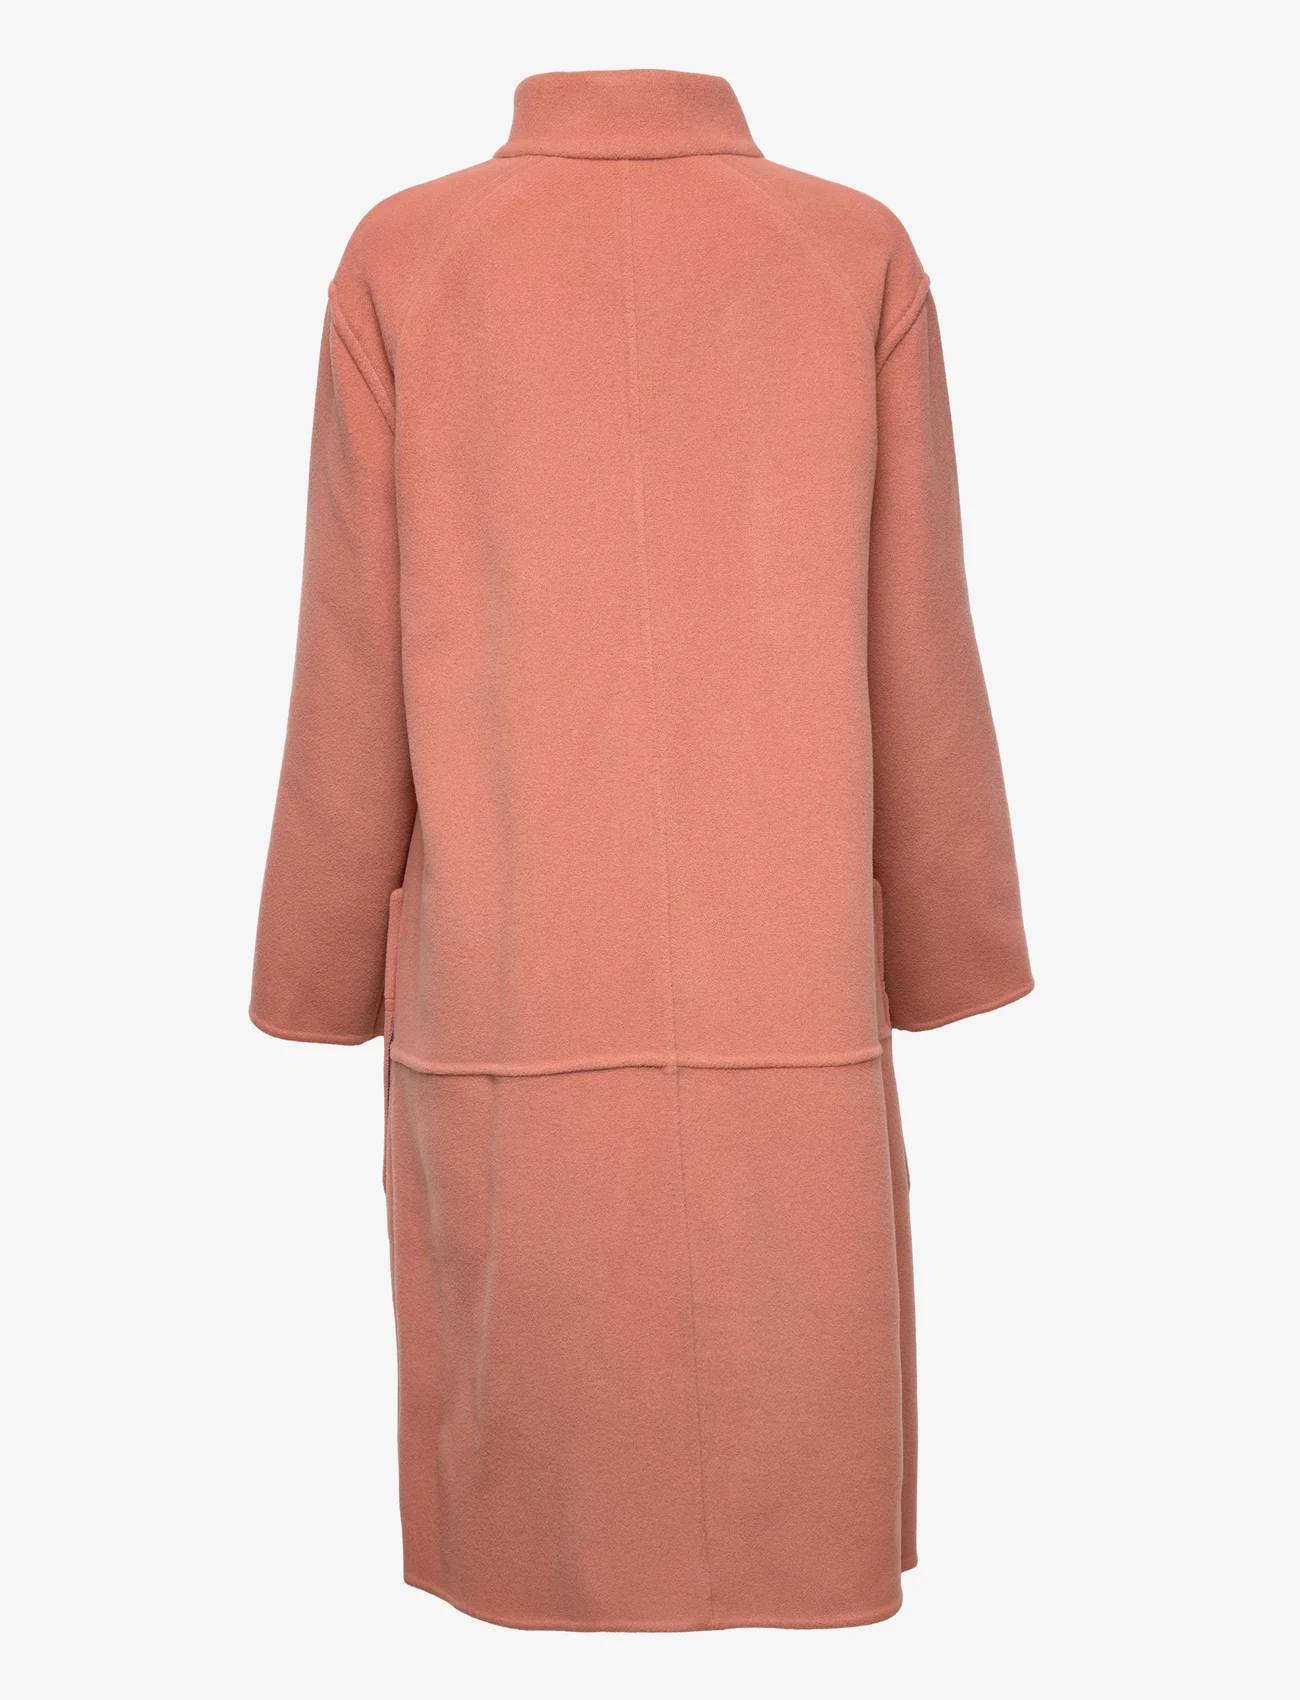 See by Chloé - COAT - winter coats - blushy brown - 1